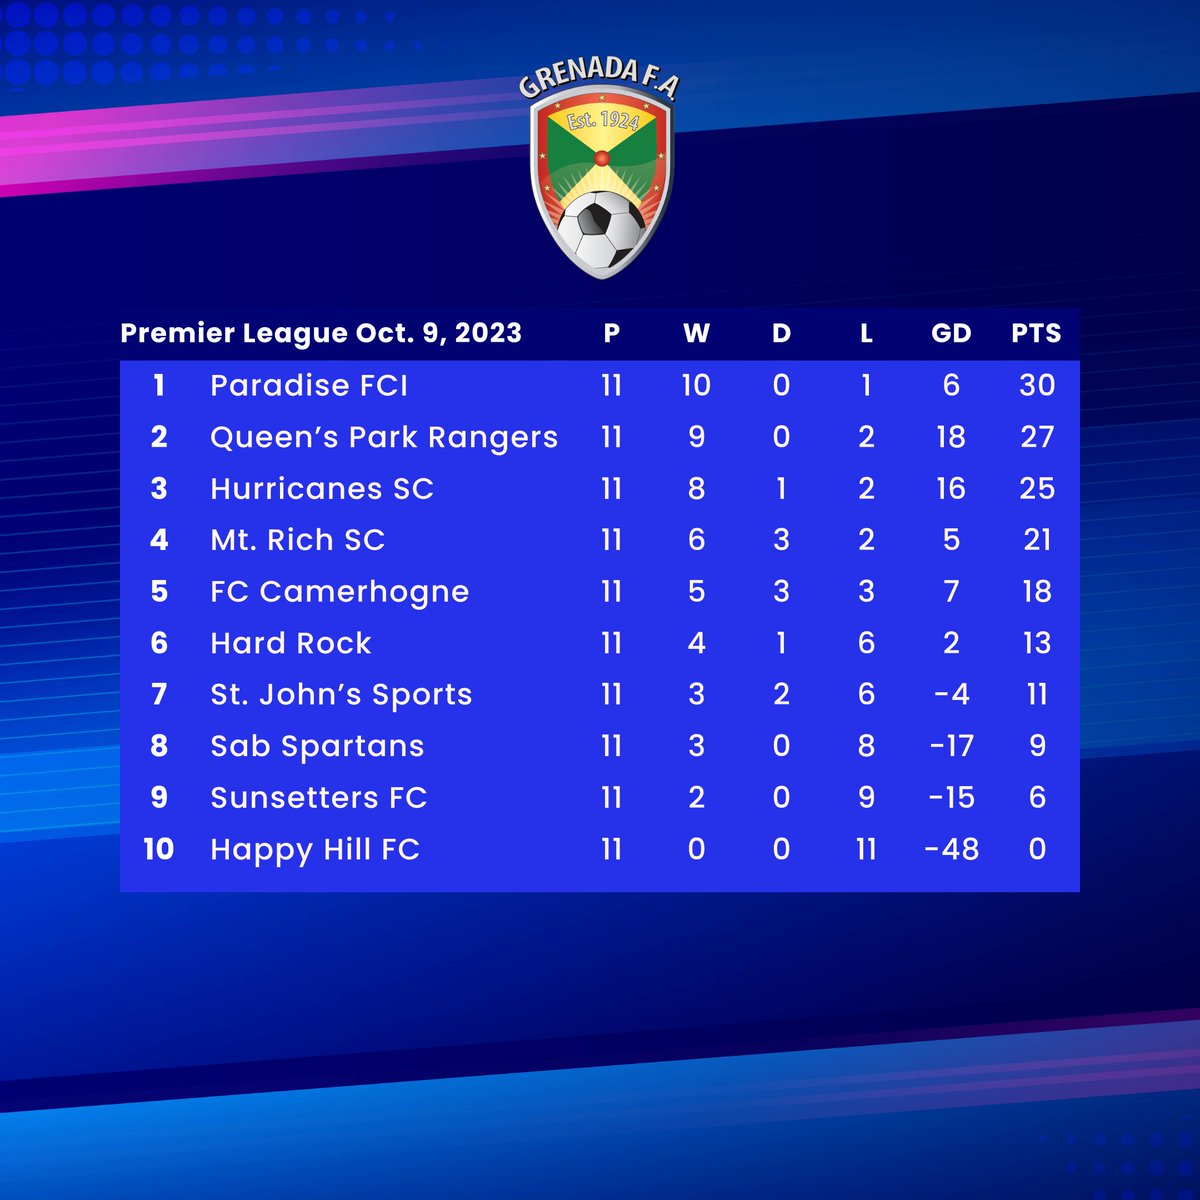 Queen's Park Rangers mean business this season. They are back in second place in the Premier League point standings after their 4-1 victory over Sunsetters FC on Saturday, kicking Hurricanes SC to third place. Paradise FCI remains at the top with a three point lead. #GrenadaFA